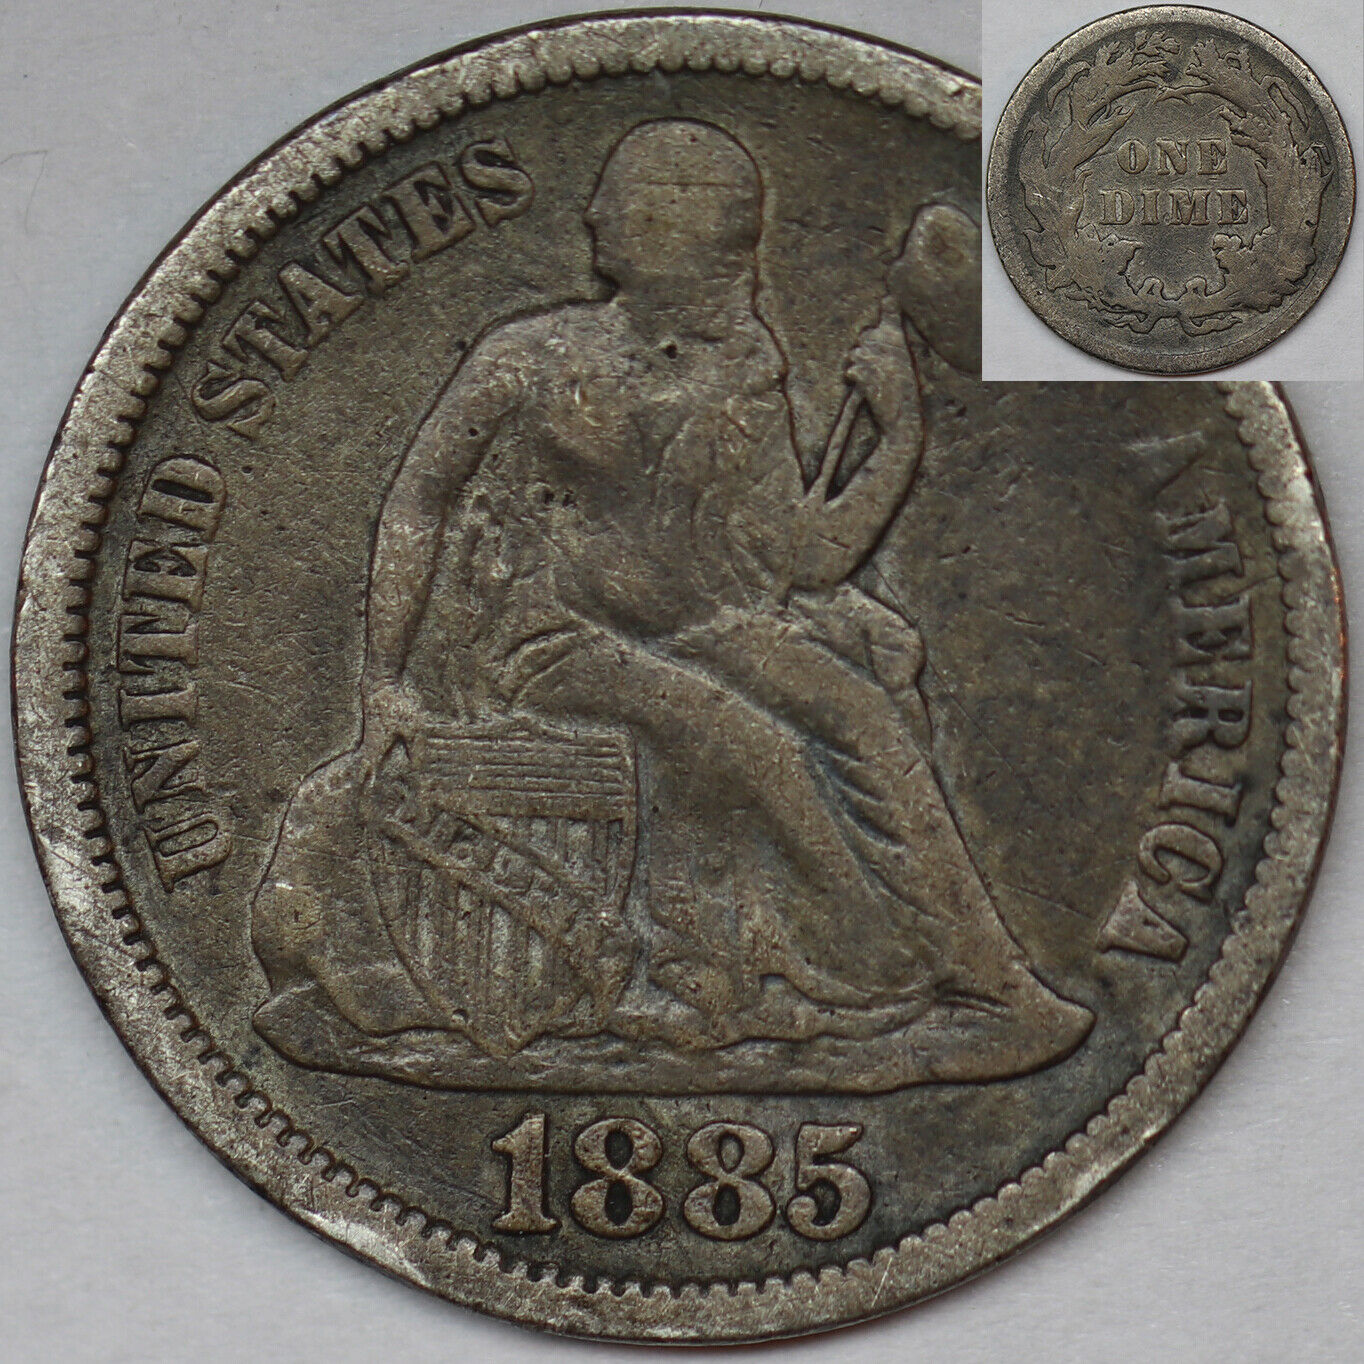 1885 P American Seated Liberty Dime Philadelphia Mint Us 10 Cent Numismatic Coin